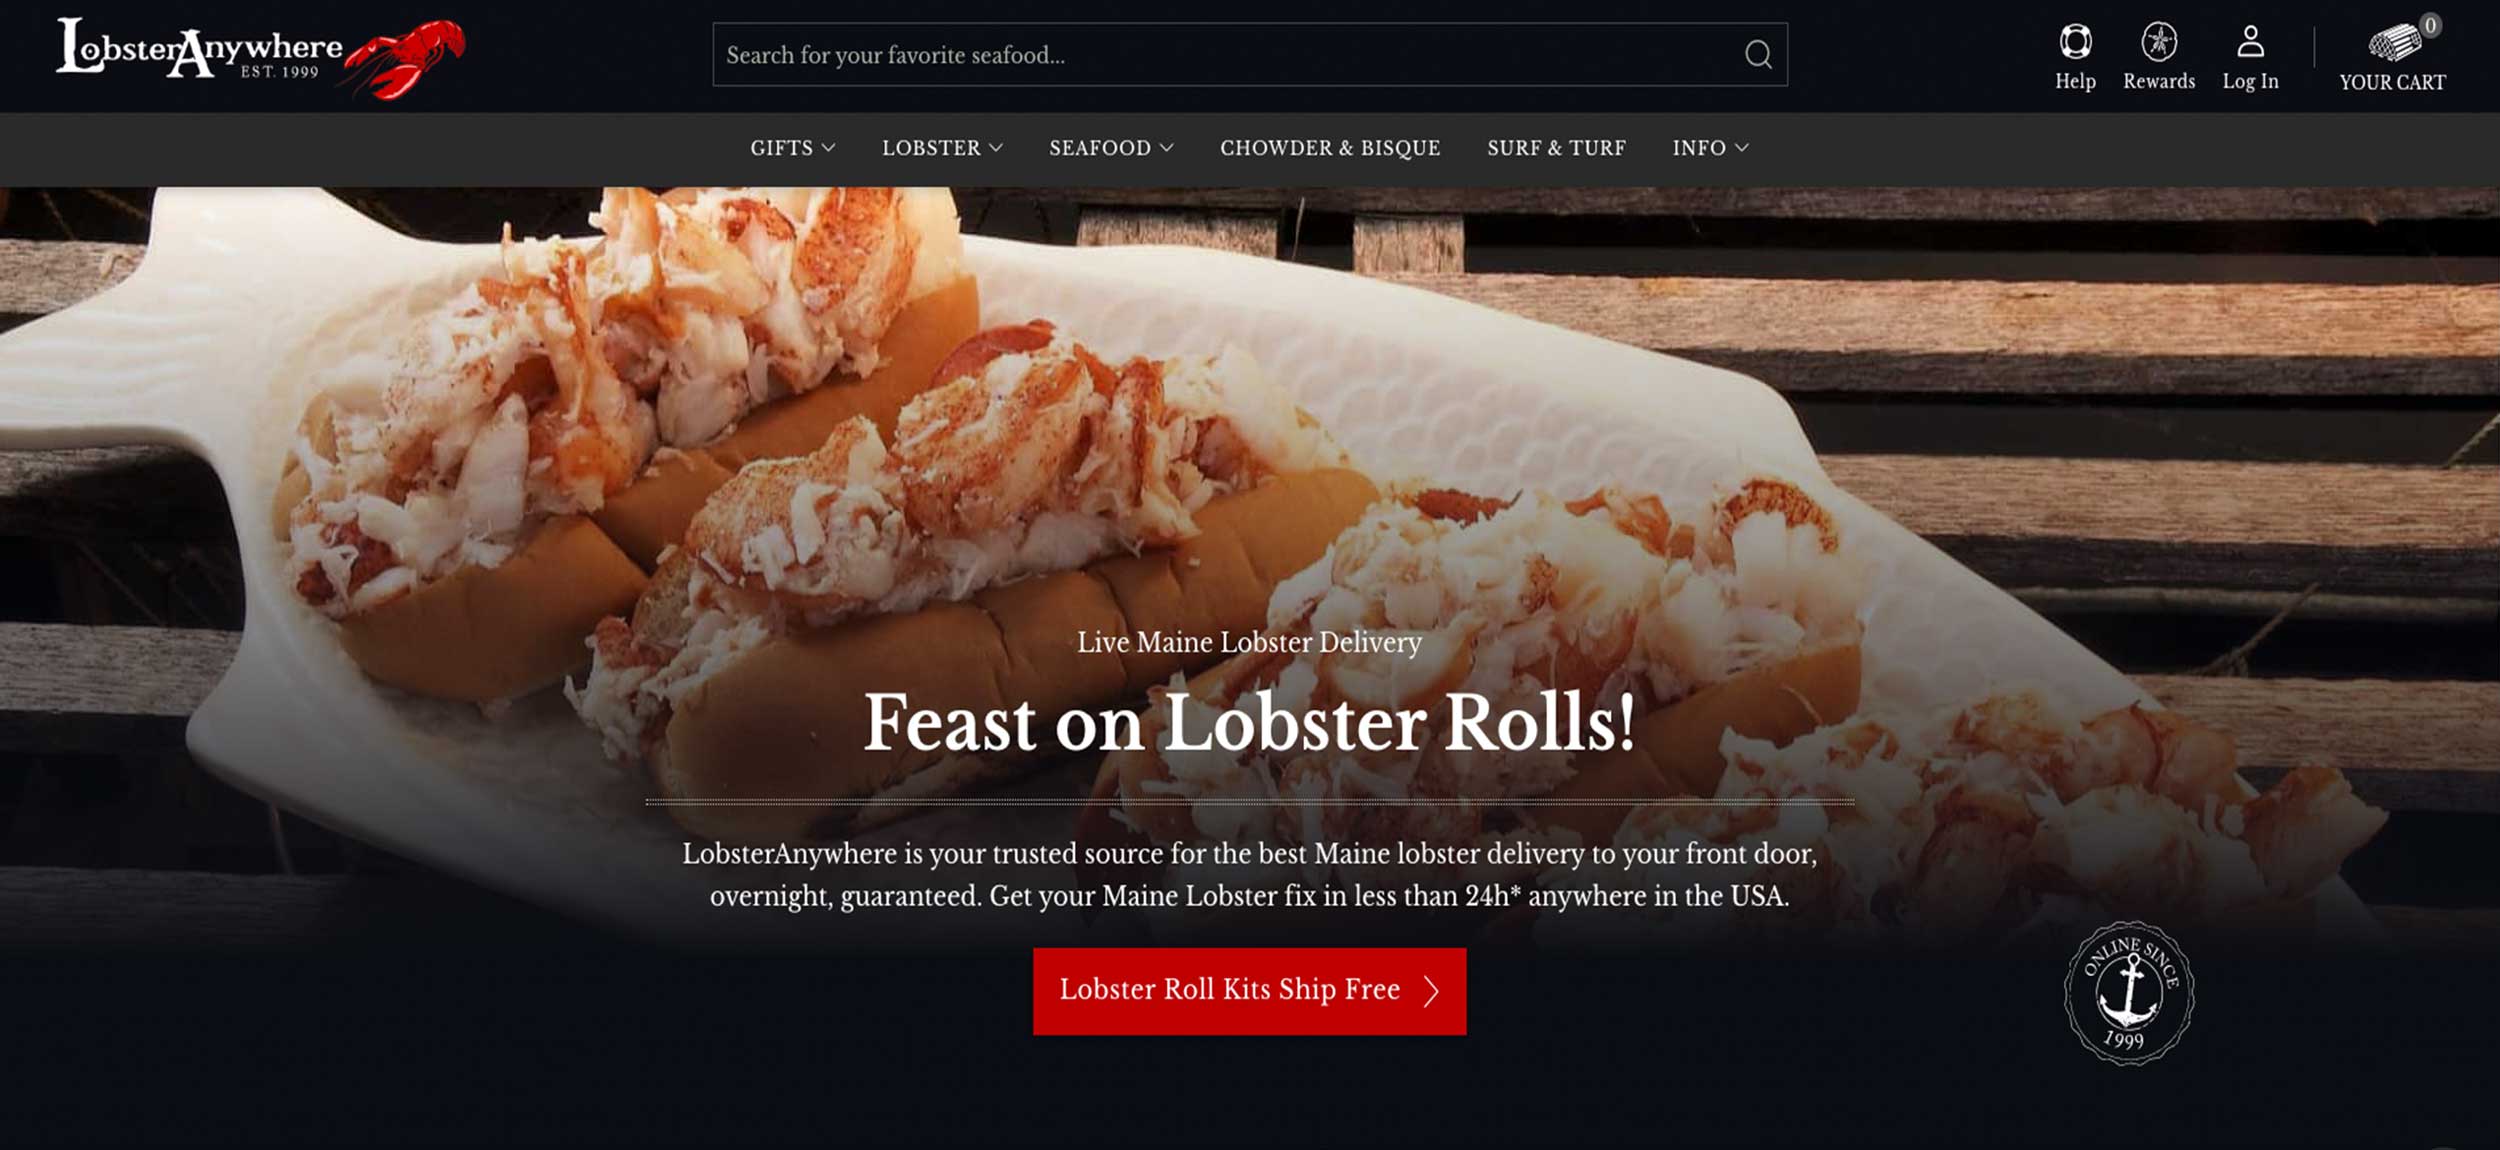 The home page of the Lobster Anywhere website